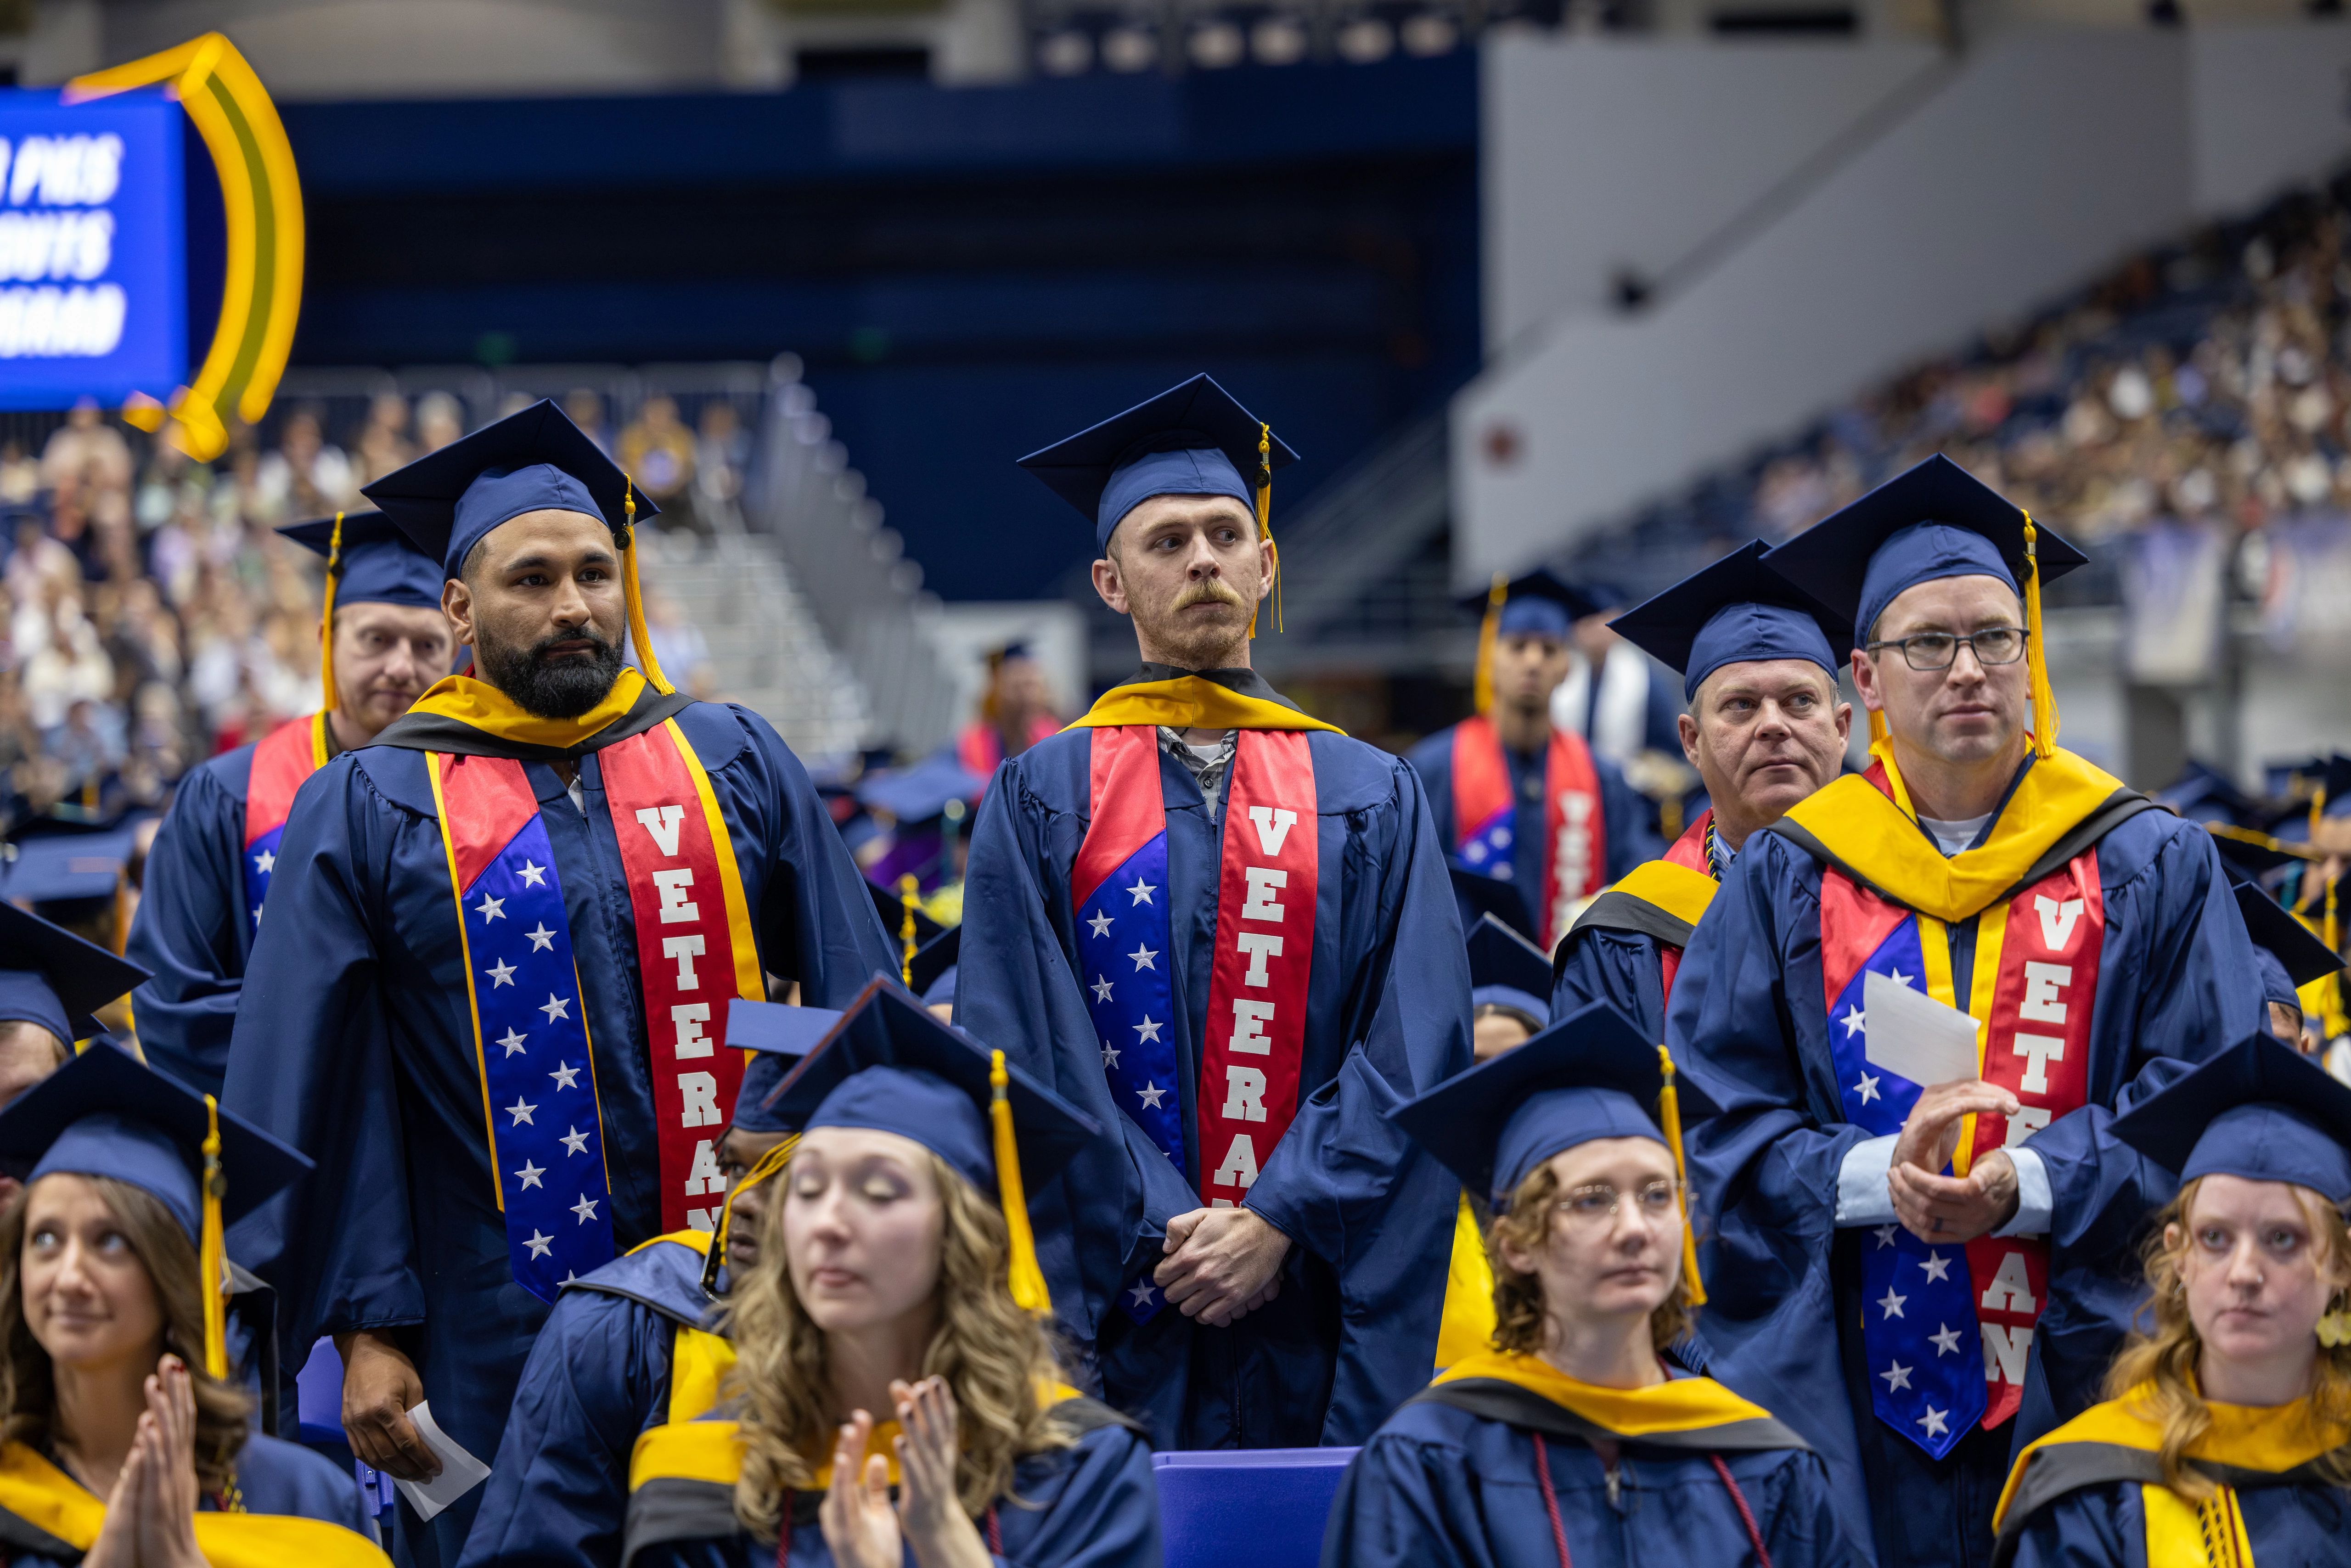 NAU military veteran students stand to be recognized during commencement